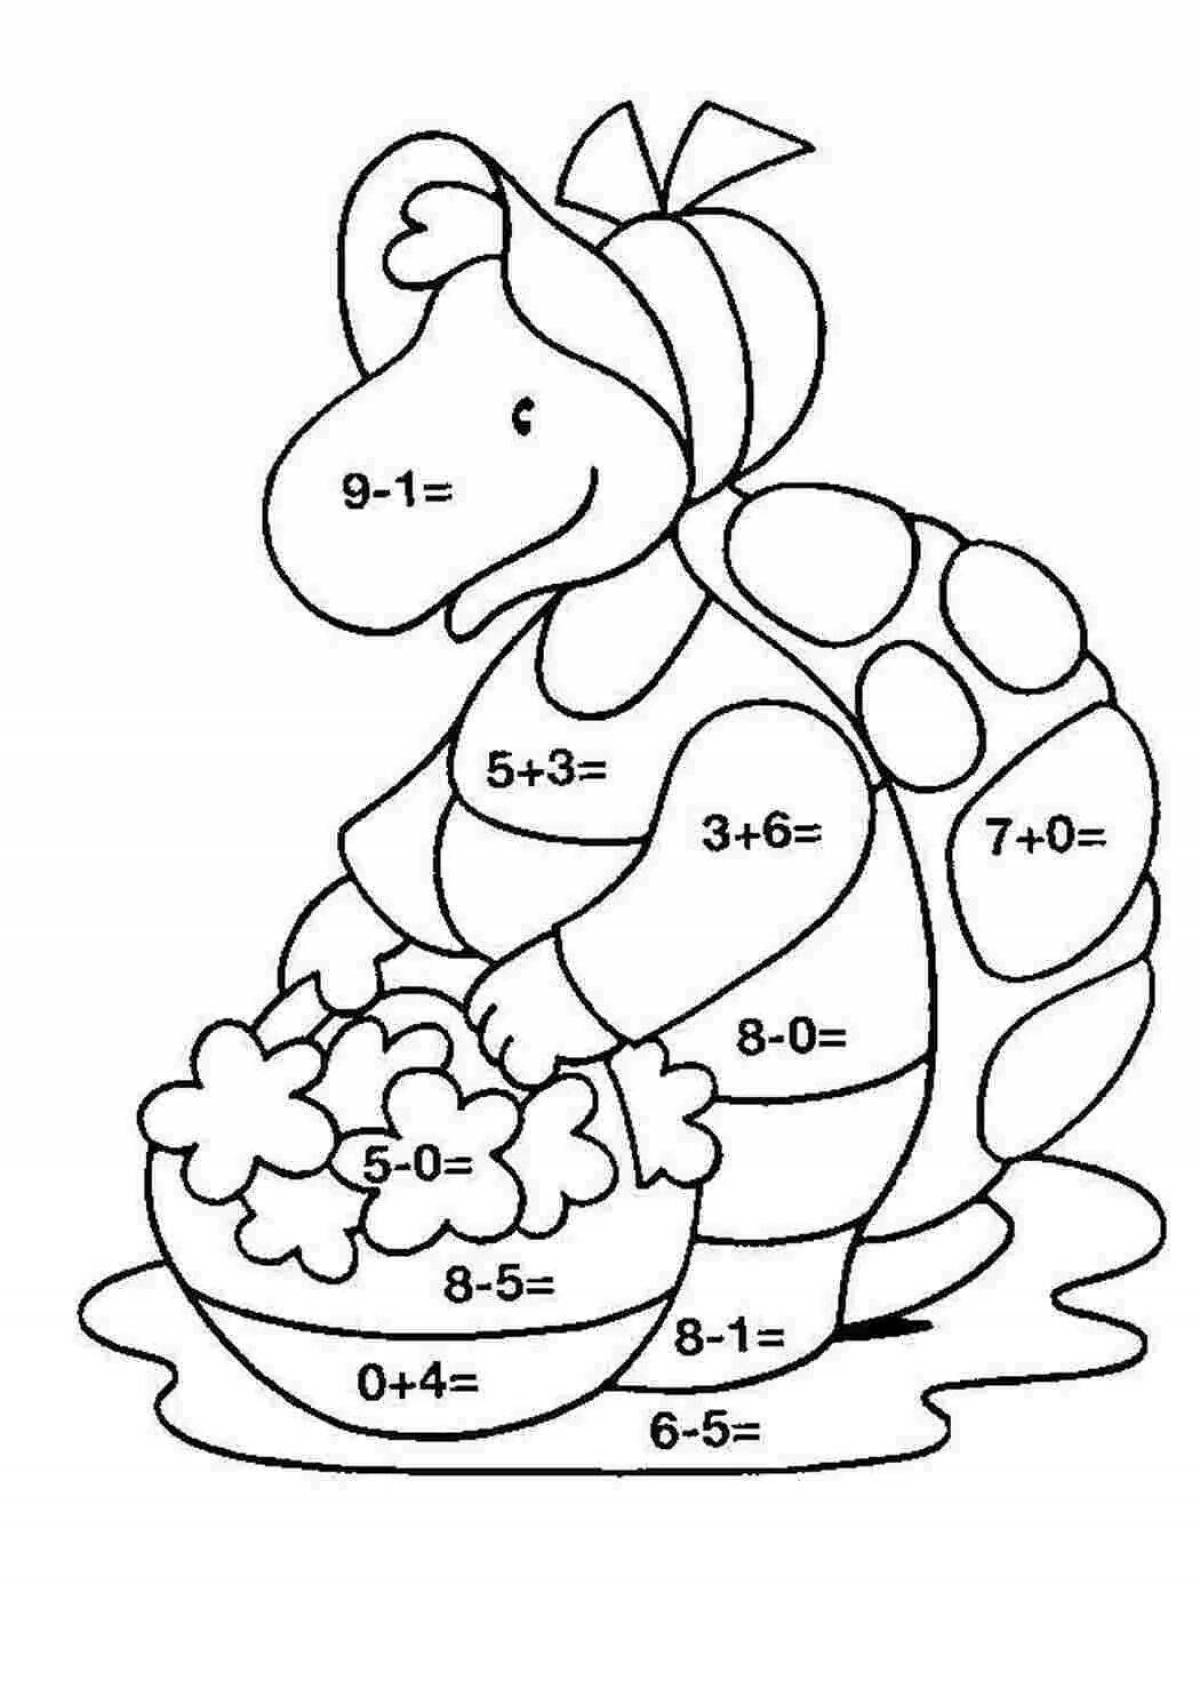 Coloring pages examples of creative solutions for preschoolers